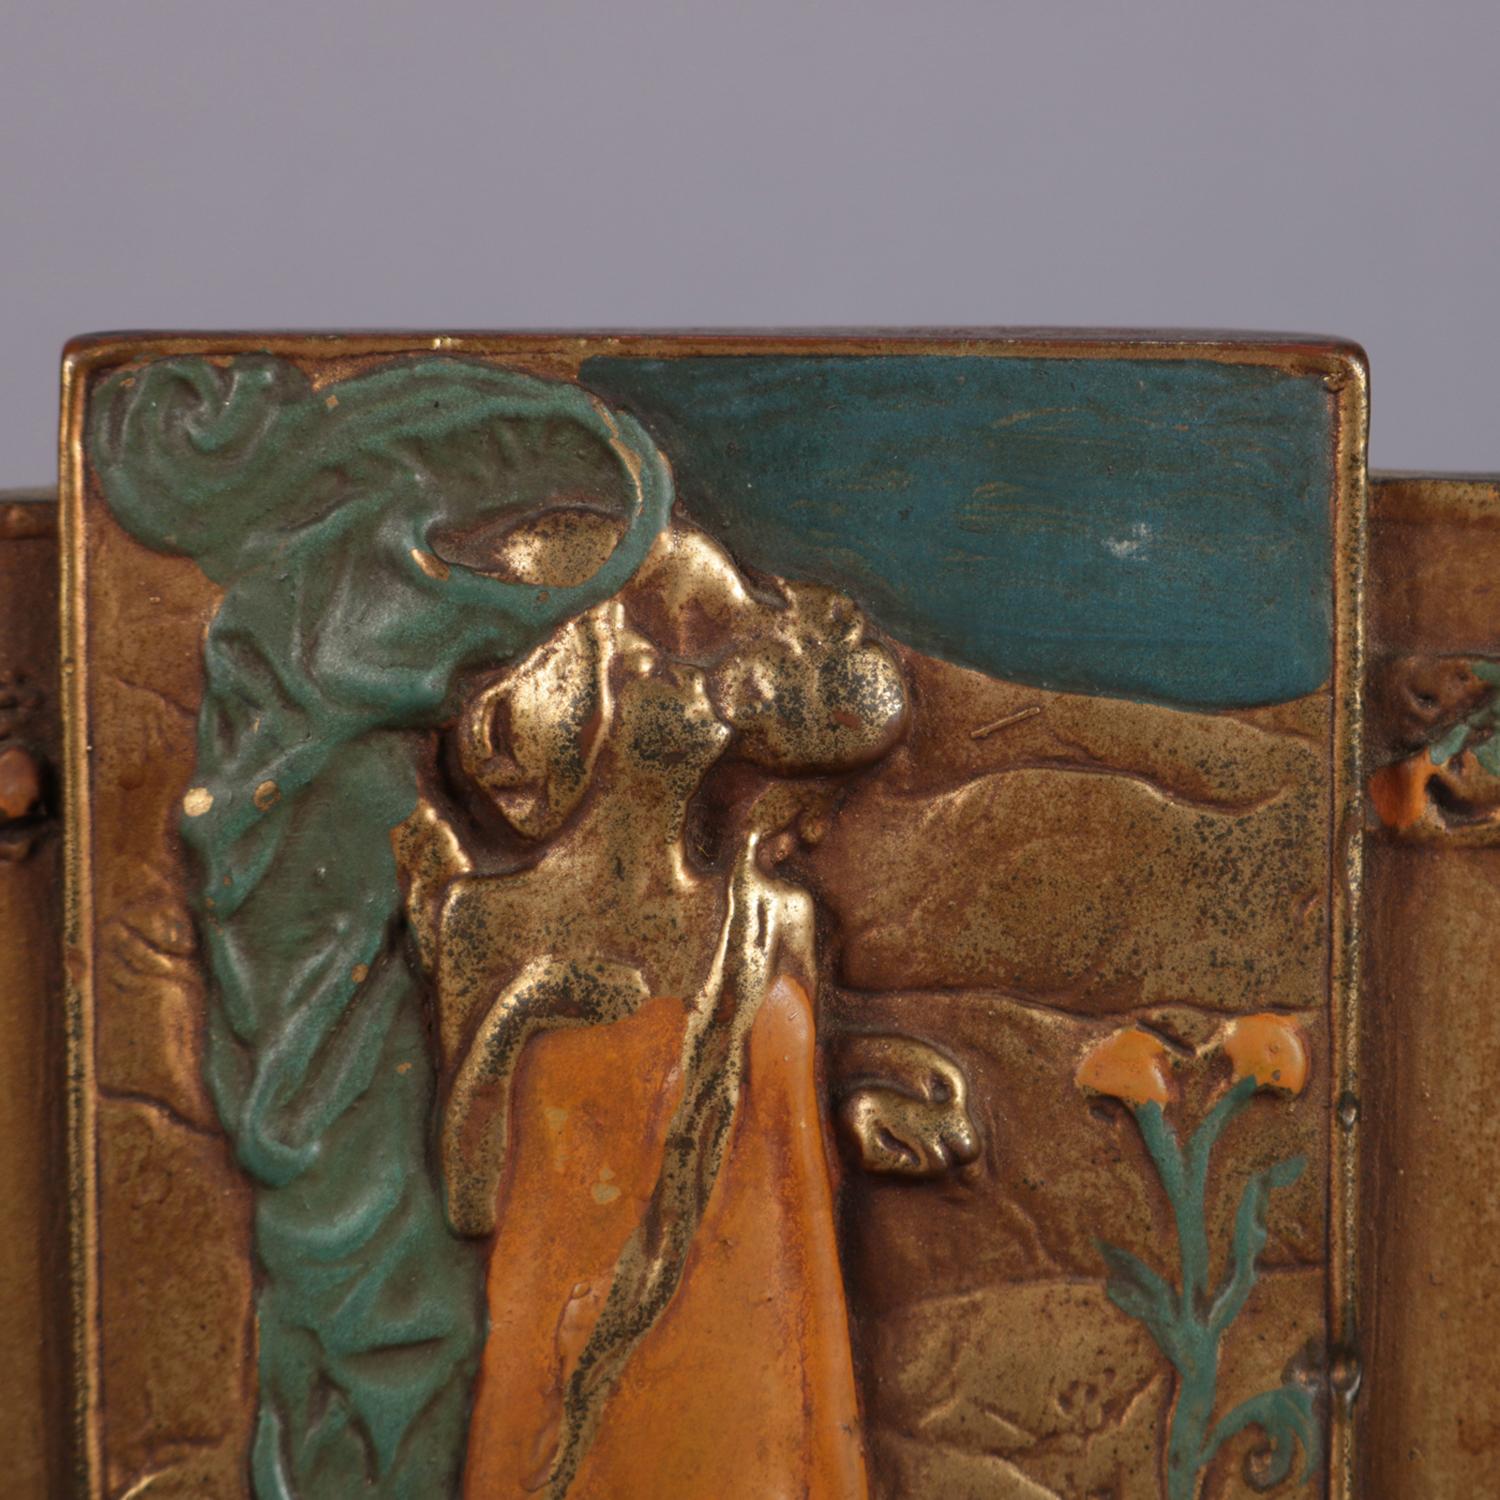 Art Nouveau bookends feature bronzed and polychromed high relief design after Gustav Klimt's 